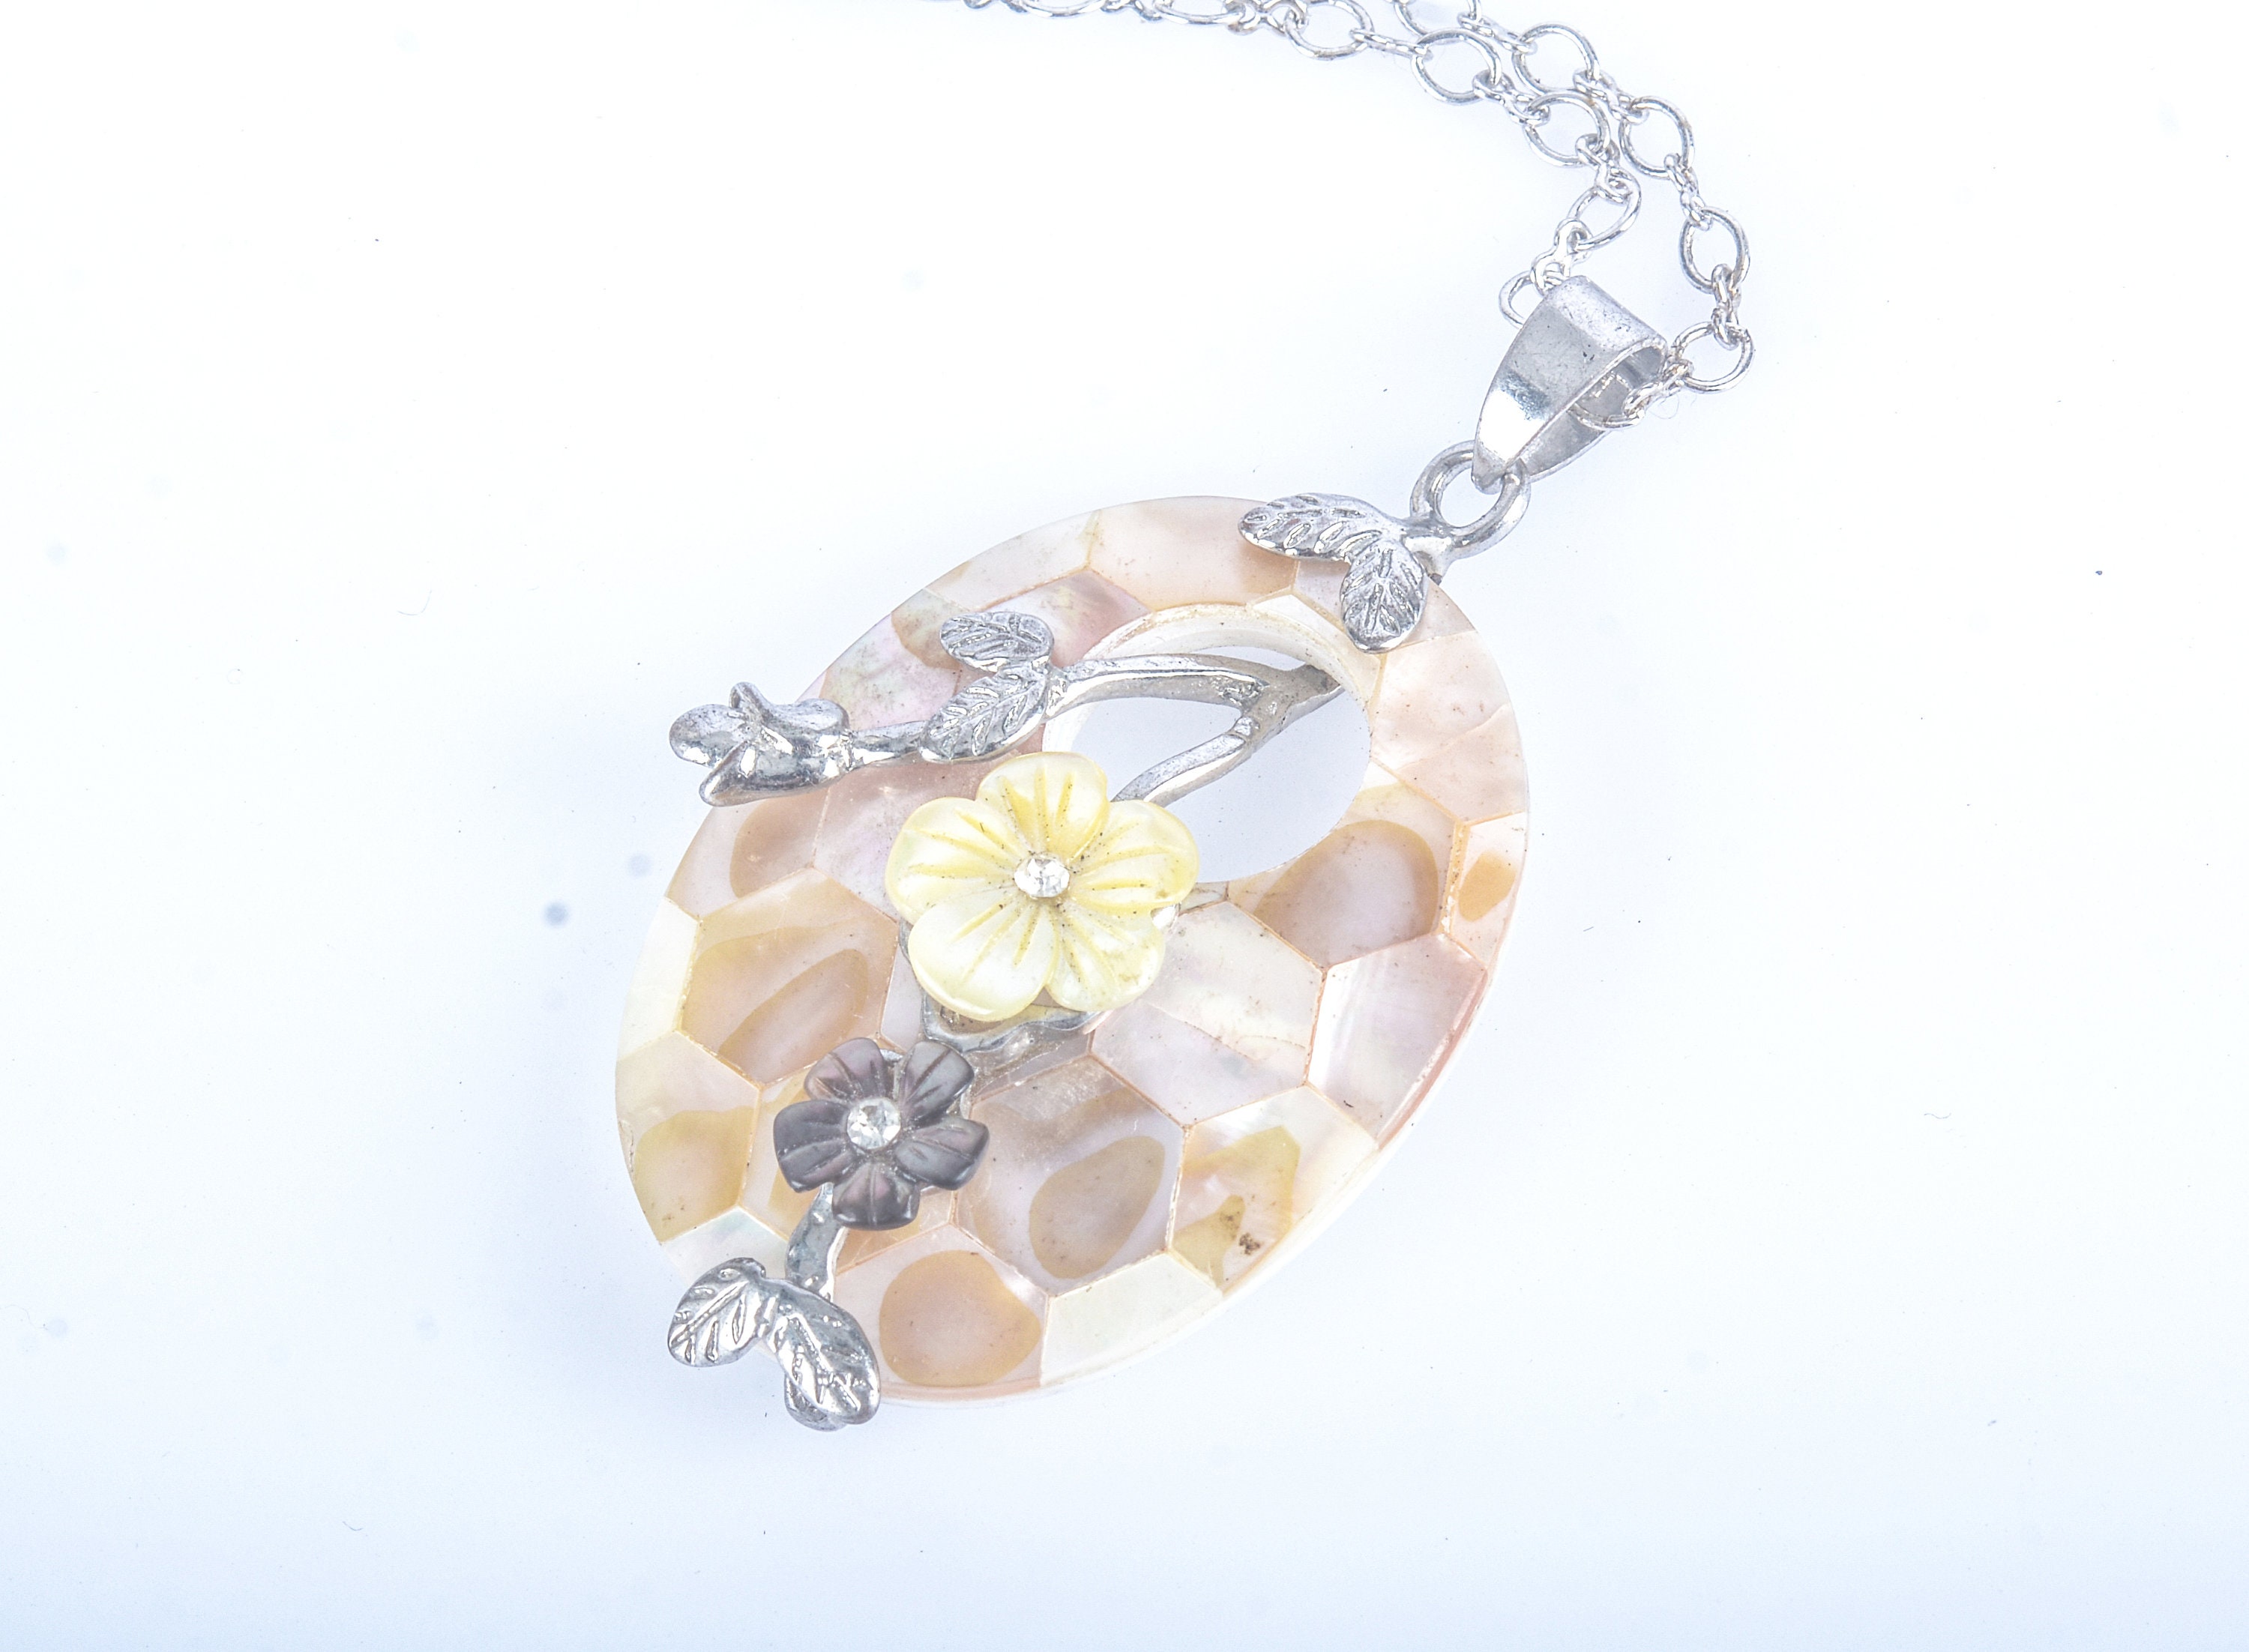 Four Leaf Clover Moonstone Mother of Pearl Necklace with 14K Gold Plat –  Huge Tomato